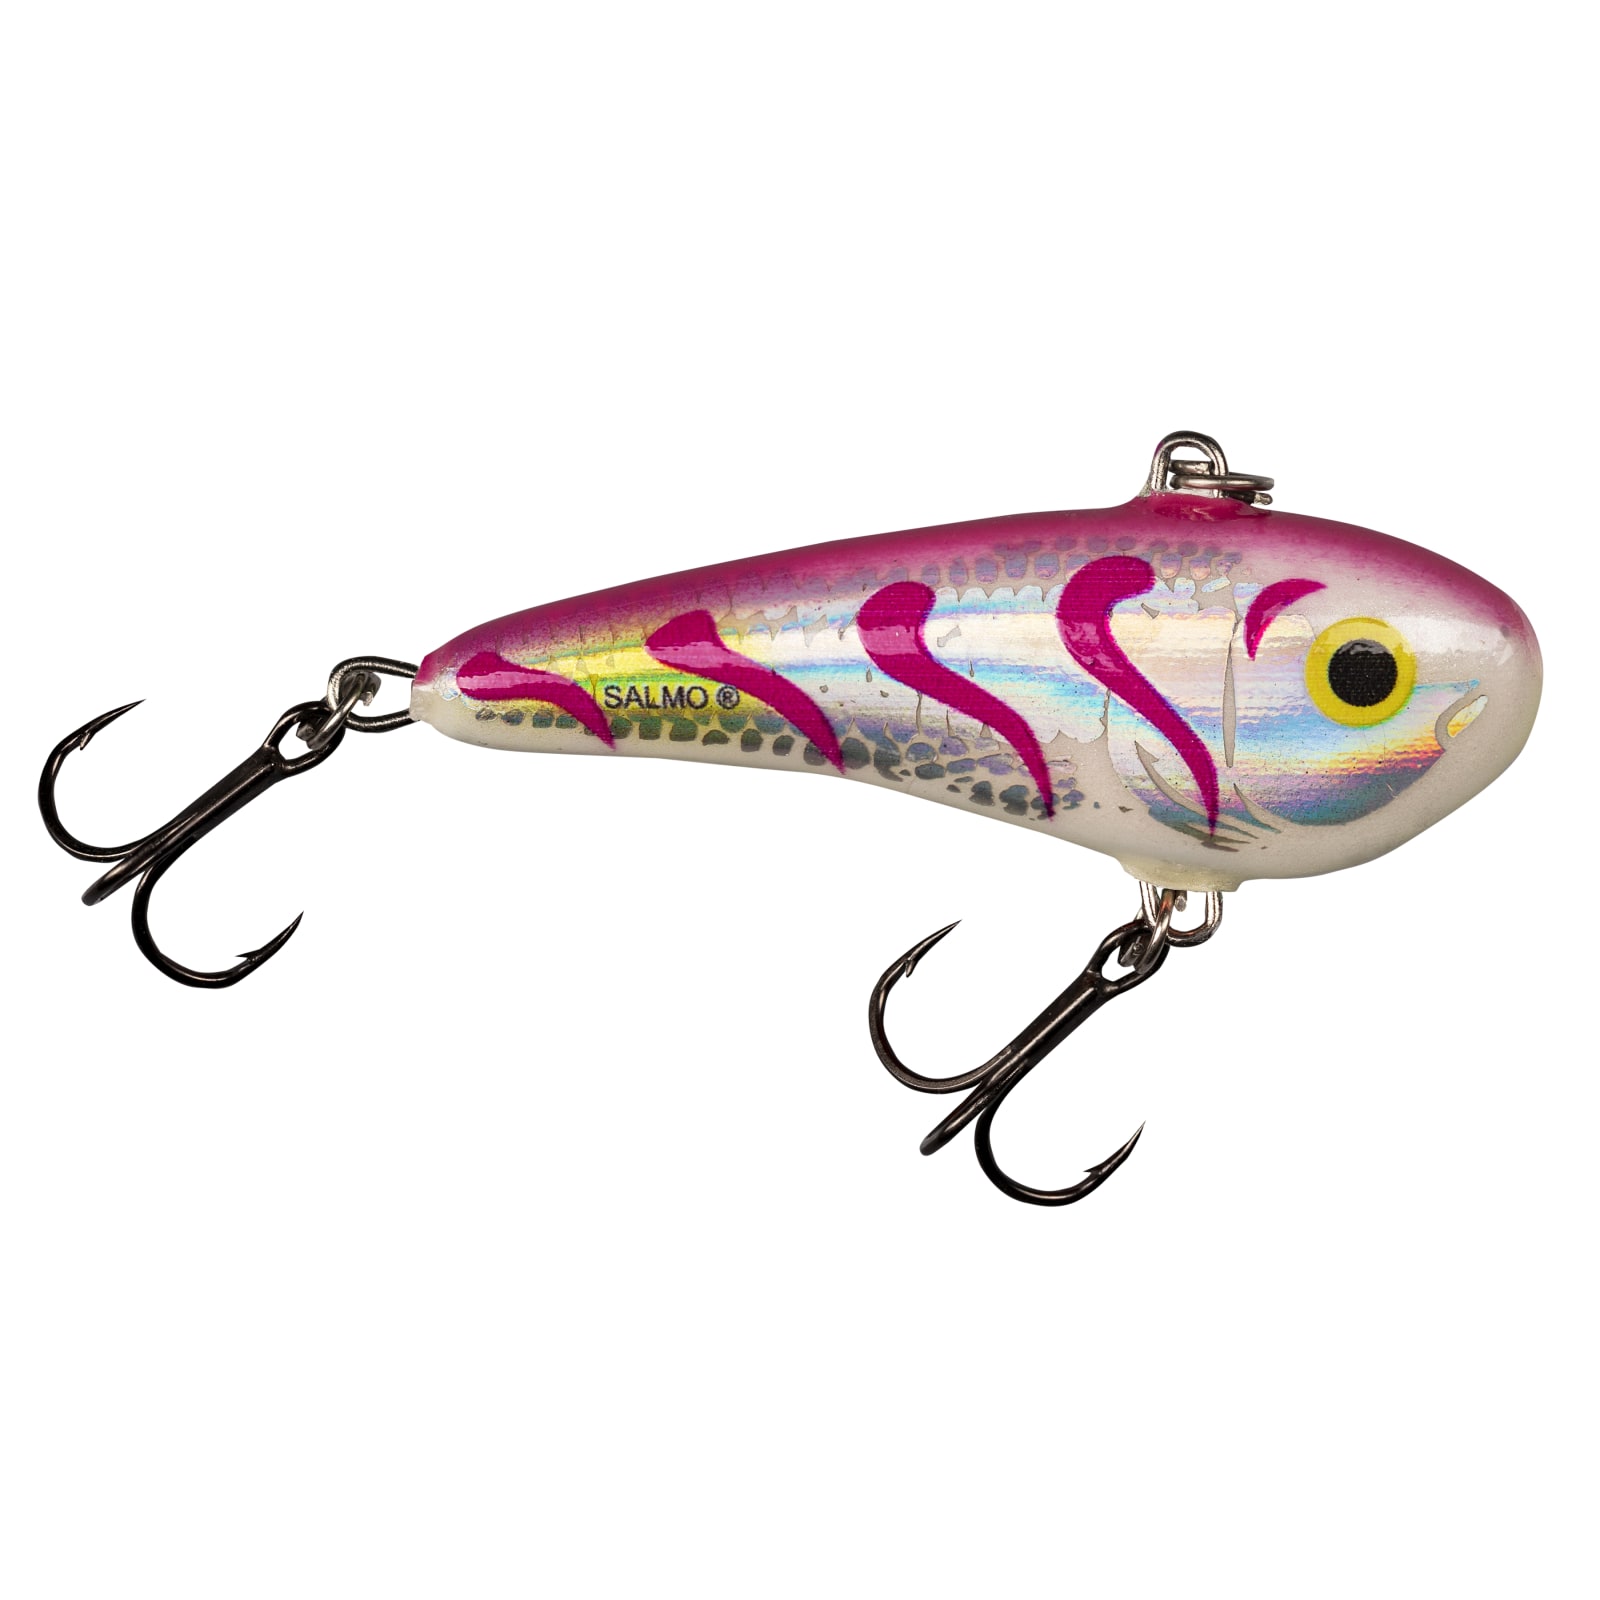 Holographic Pink Tiger Chubby Darter Sinking Jig by Salmo at Fleet